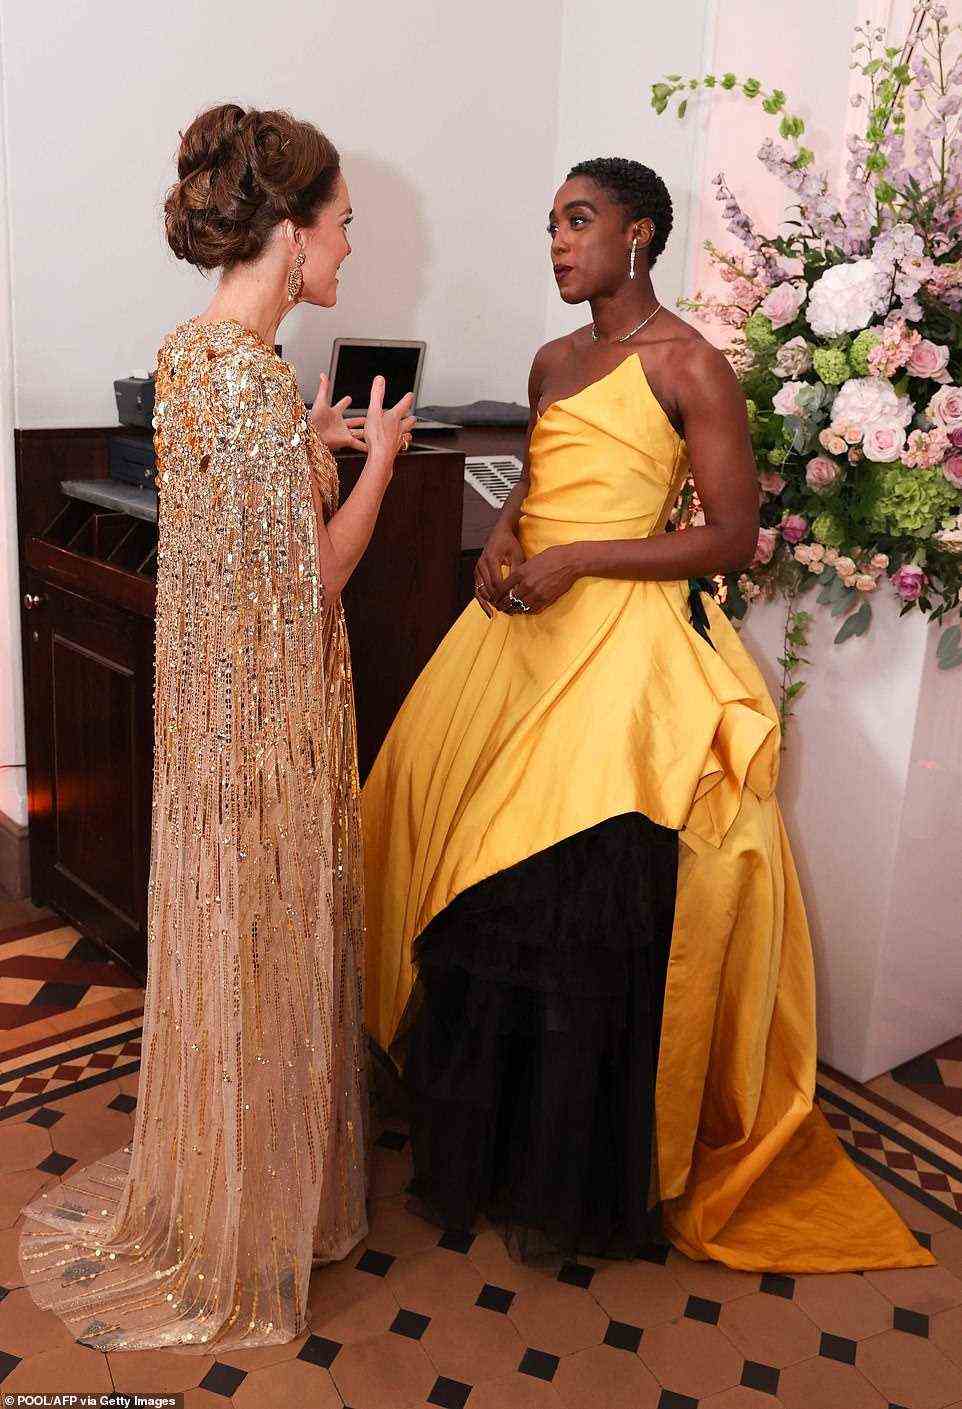 Chatting away: Lashana and Kate also appeared deep in conversation with the former putting on an animated display